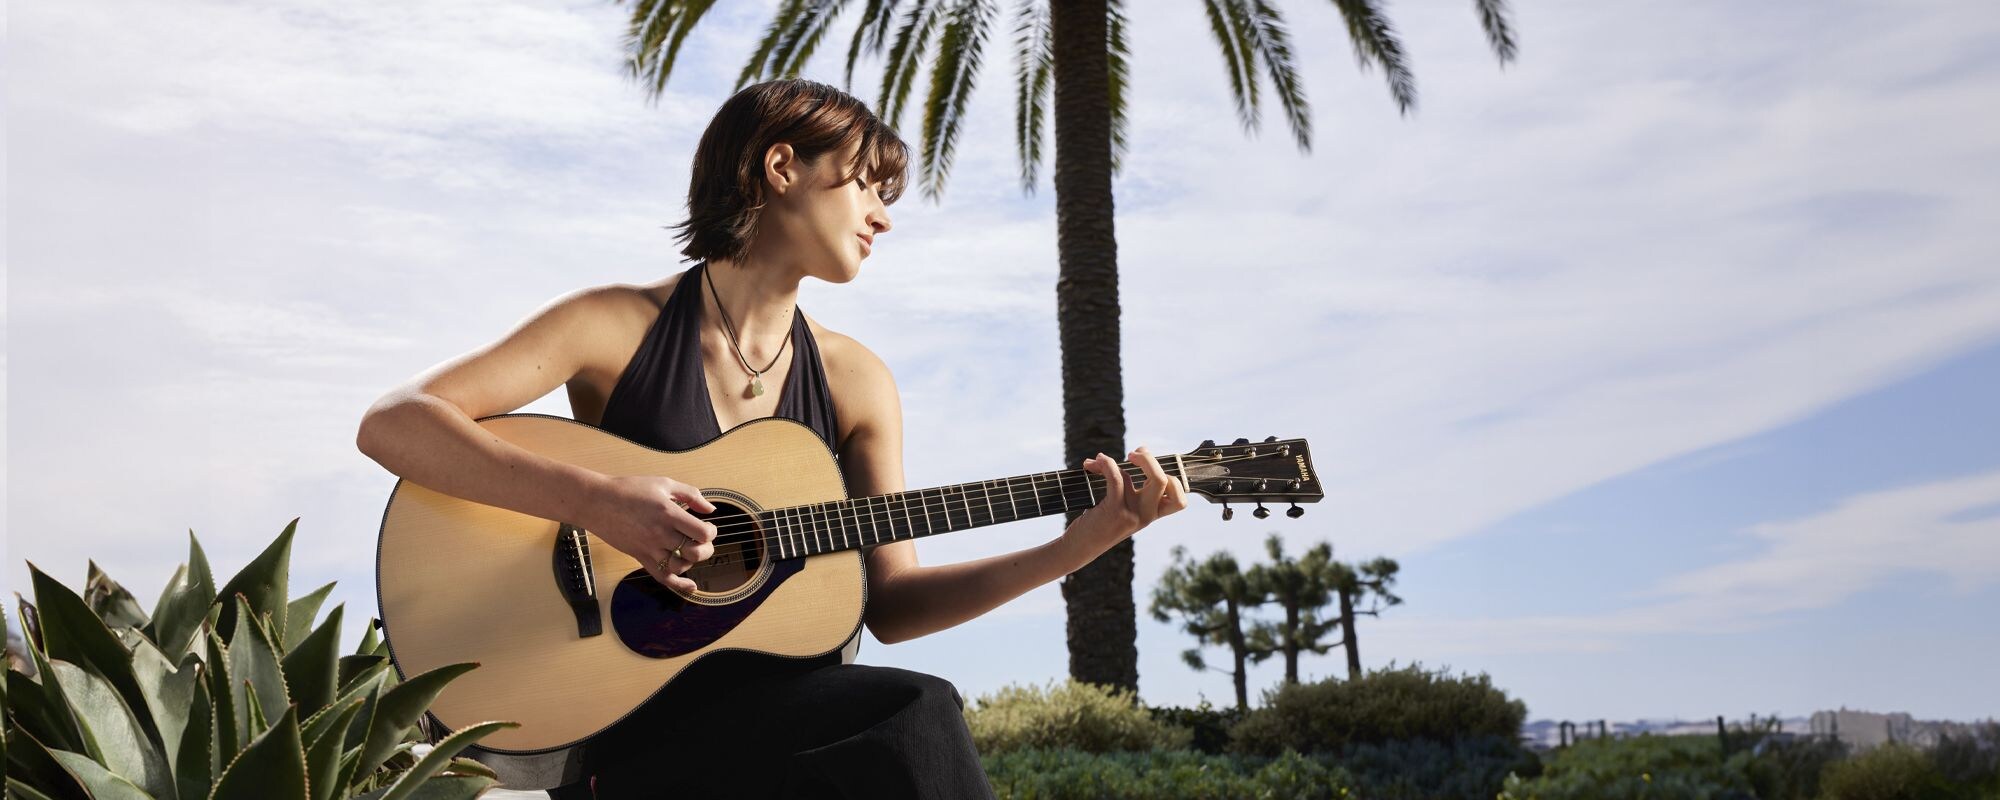 Guitarist Sophia James playing an FS9 guitar sits in front of a palm tree outside and plays an FS9 acoustic guitar.